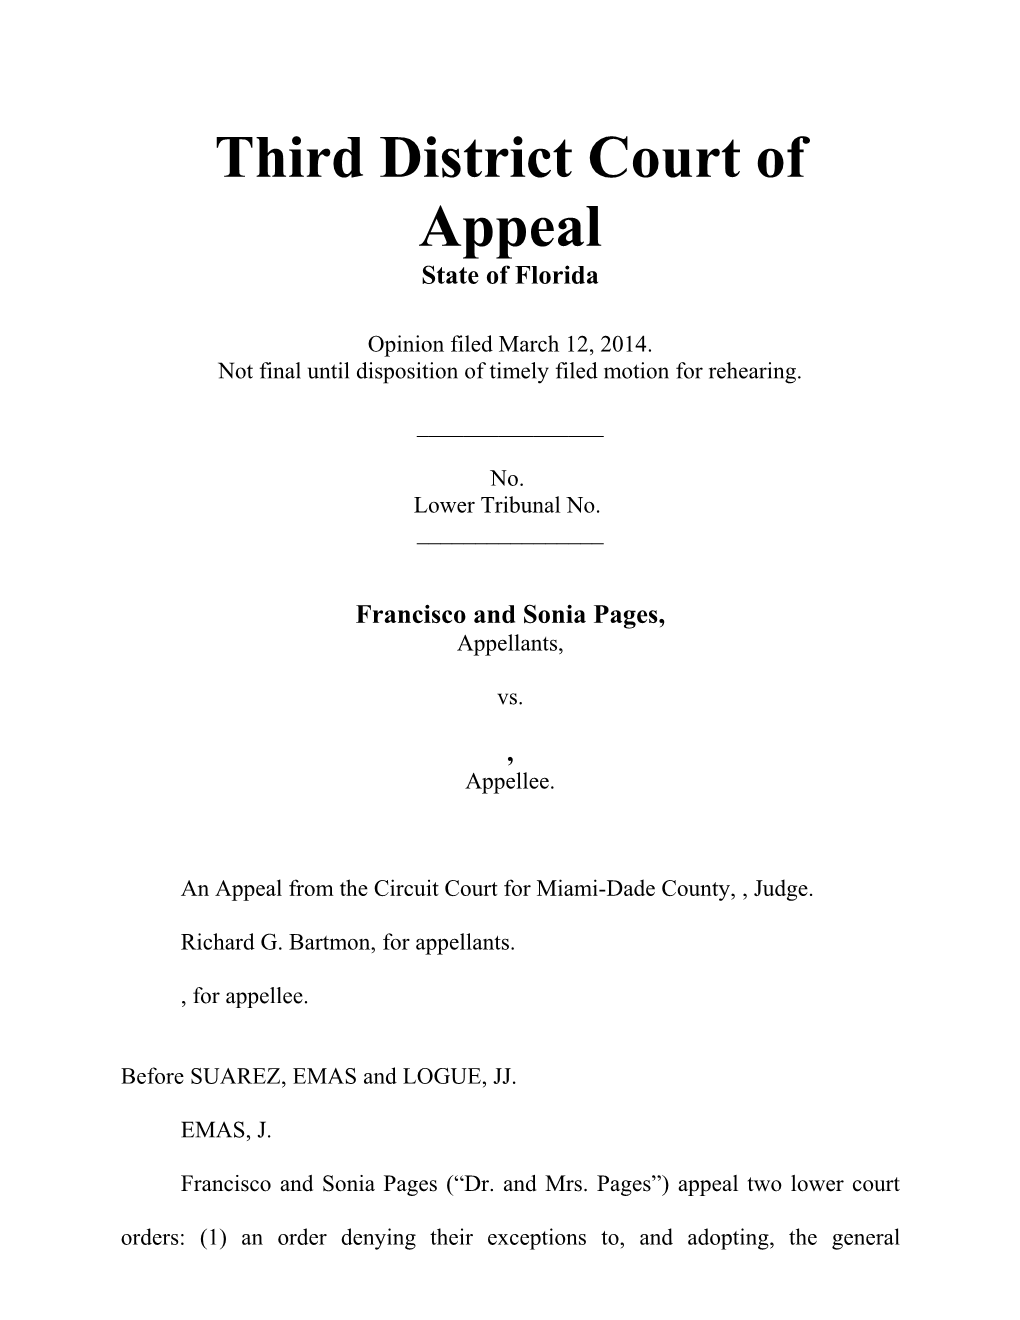 Third District Court of Appeal s2